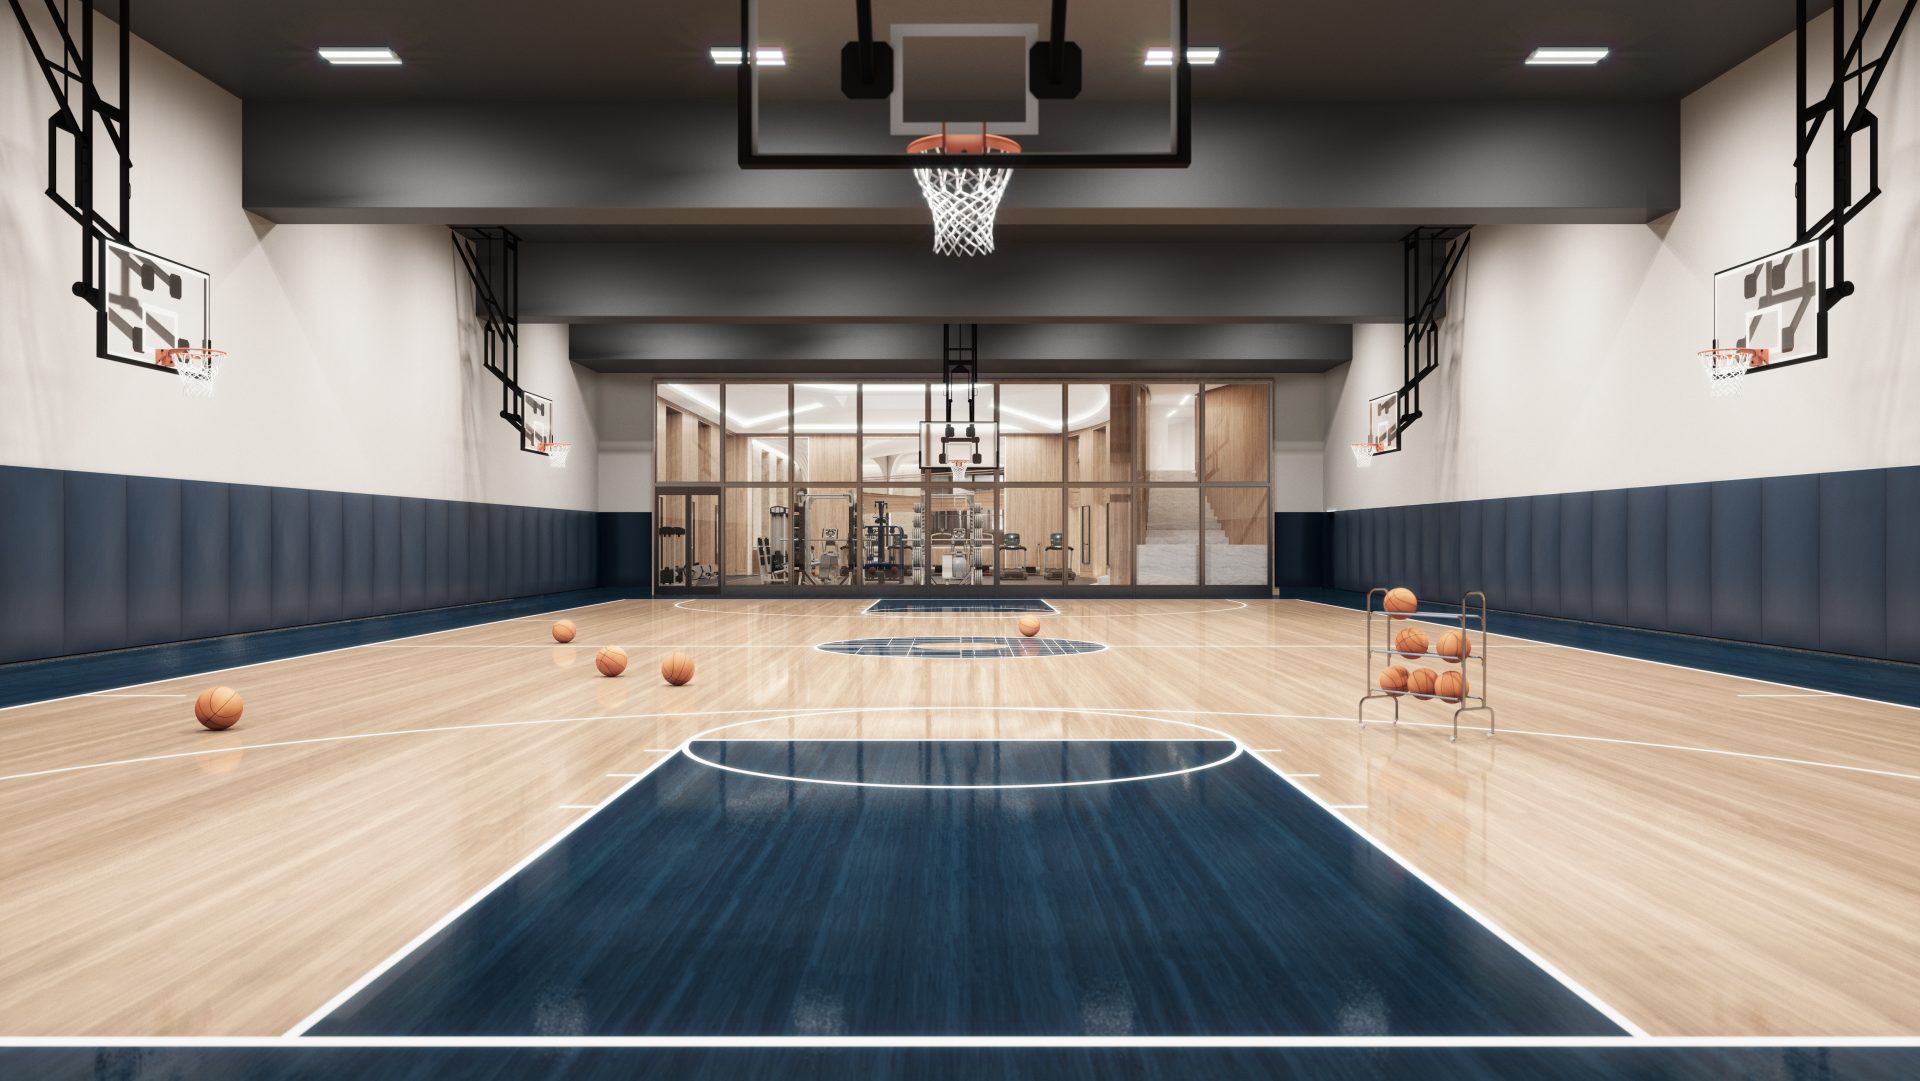 How much does an indoor basketball court cost? Make Shots